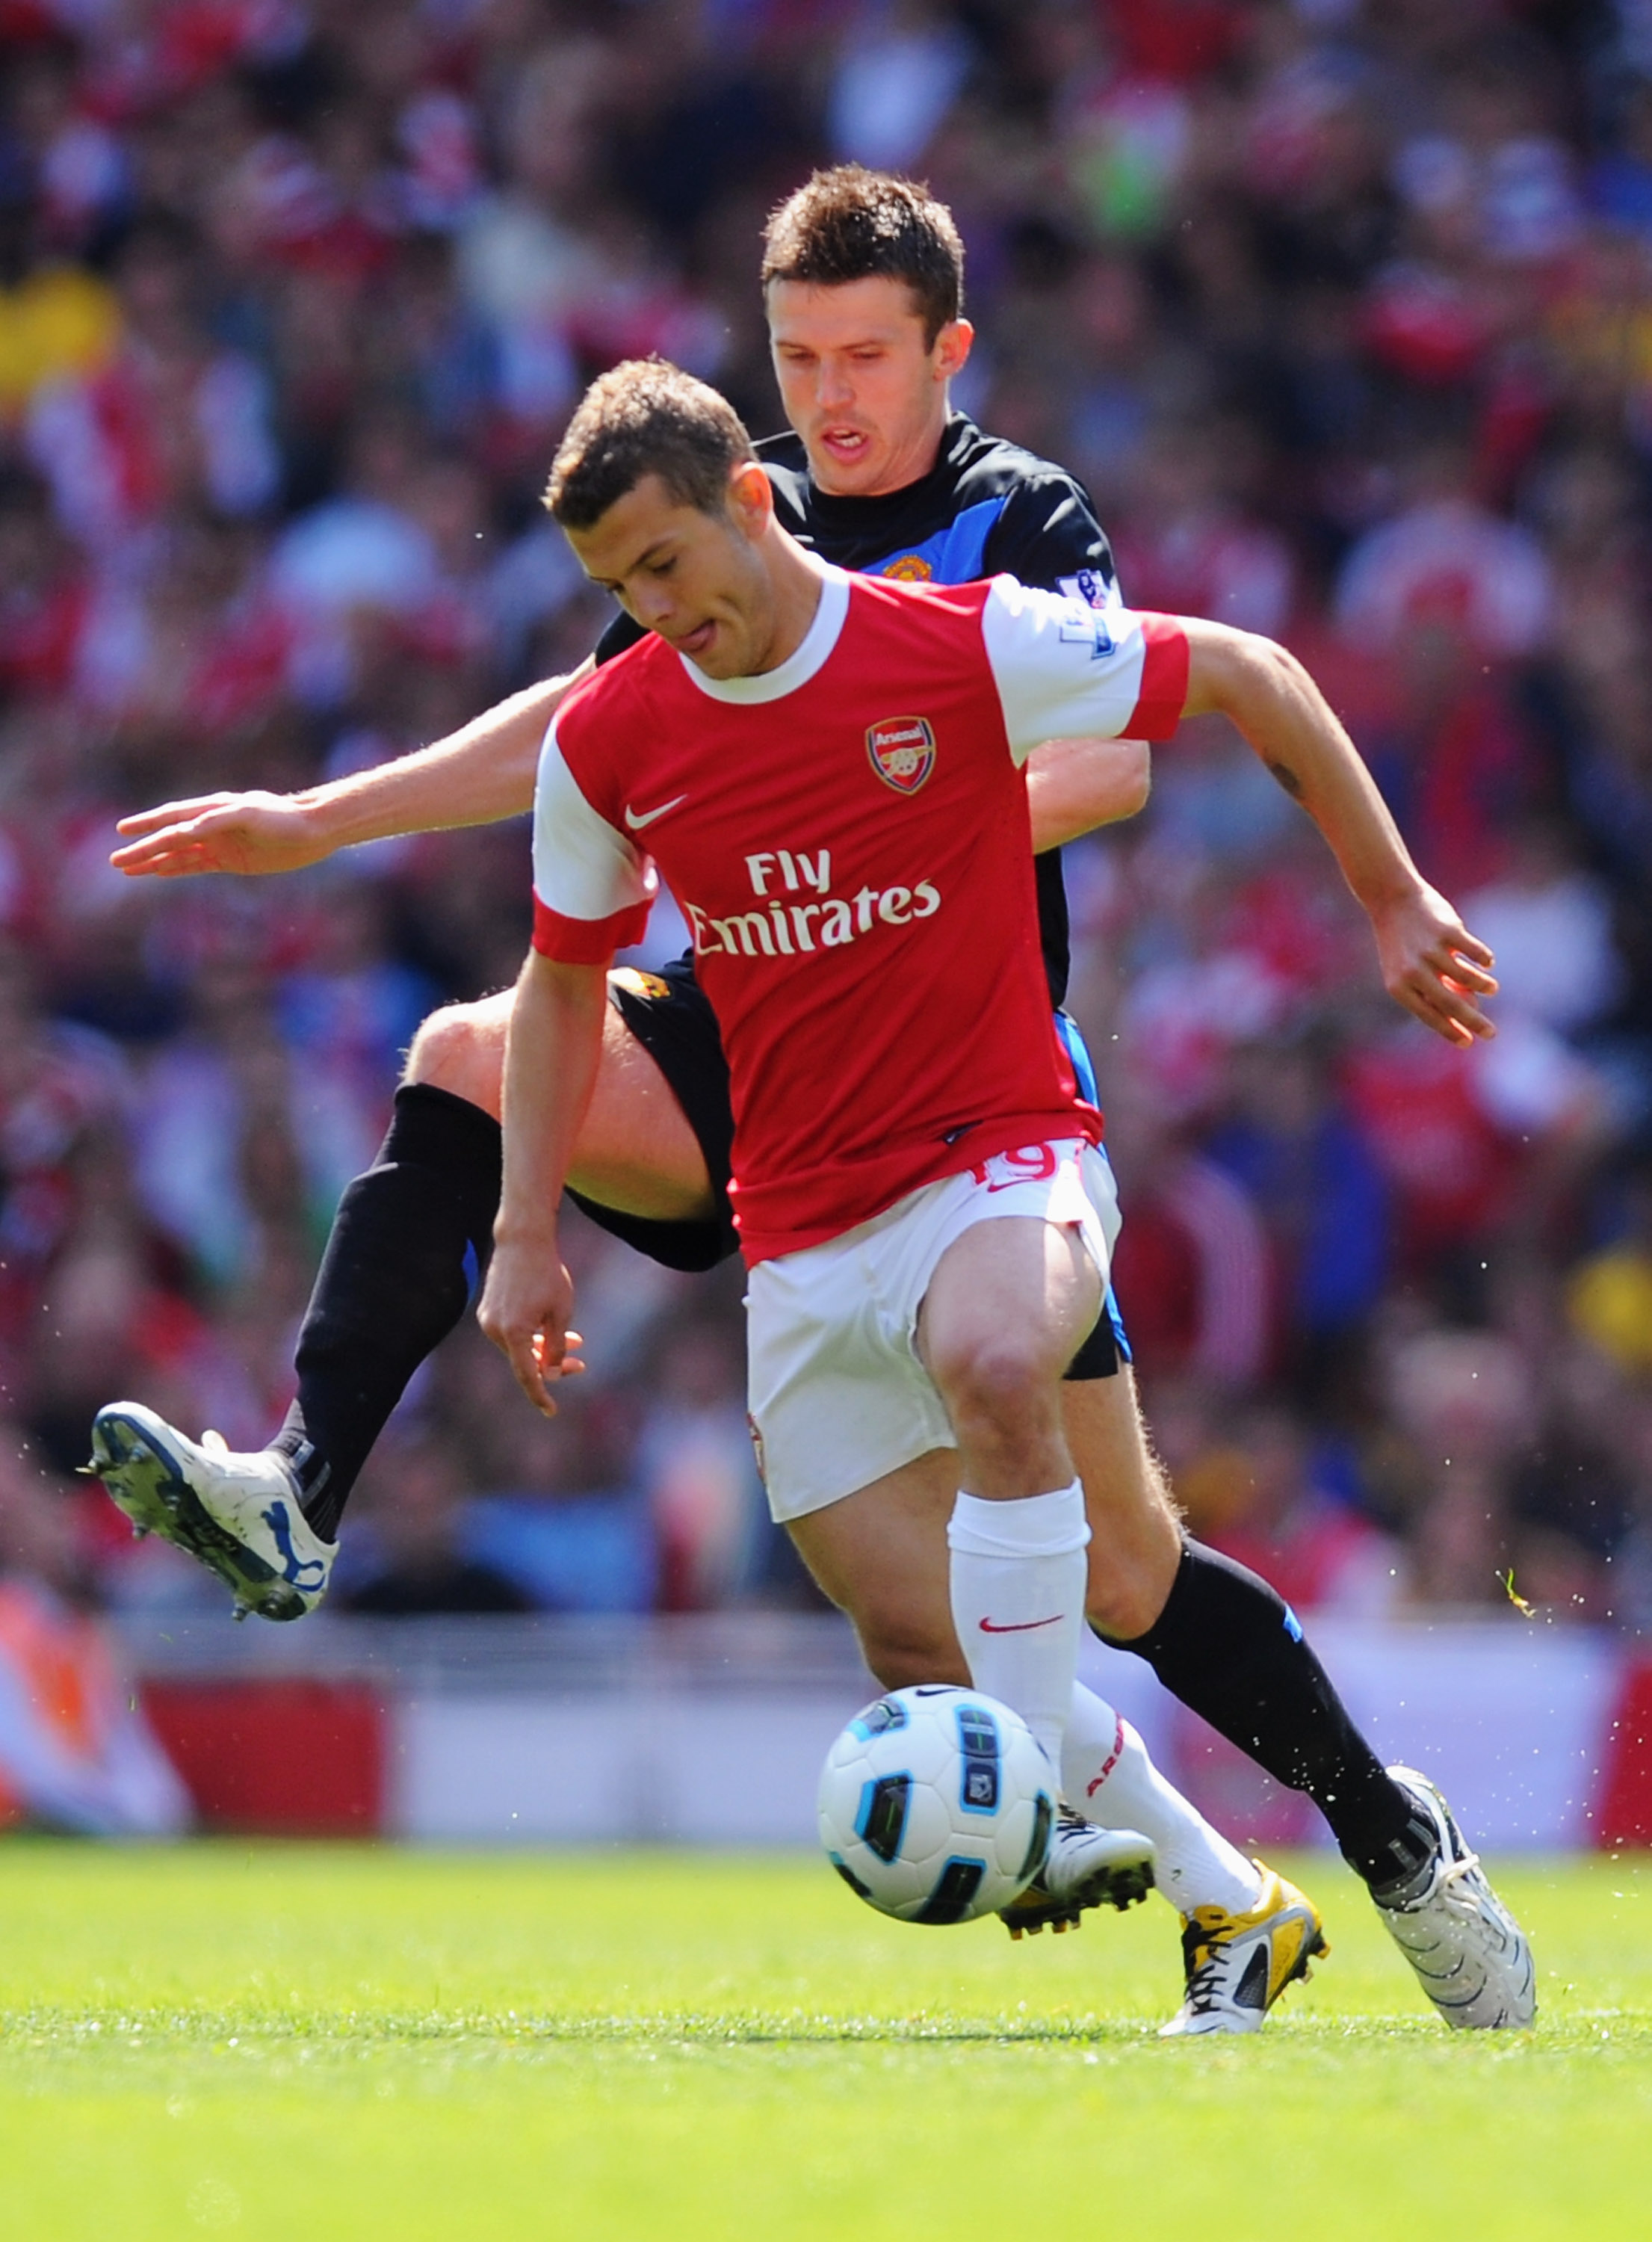 LONDON, ENGLAND - MAY 01:  Jack Wilshere of Arsenal holds off Michael Carrick of Manchester United during the Barclays Premier League match between Arsenal and Manchester United at the Emirates Stadium on May 1, 2011 in London, England.  (Photo by Mike He